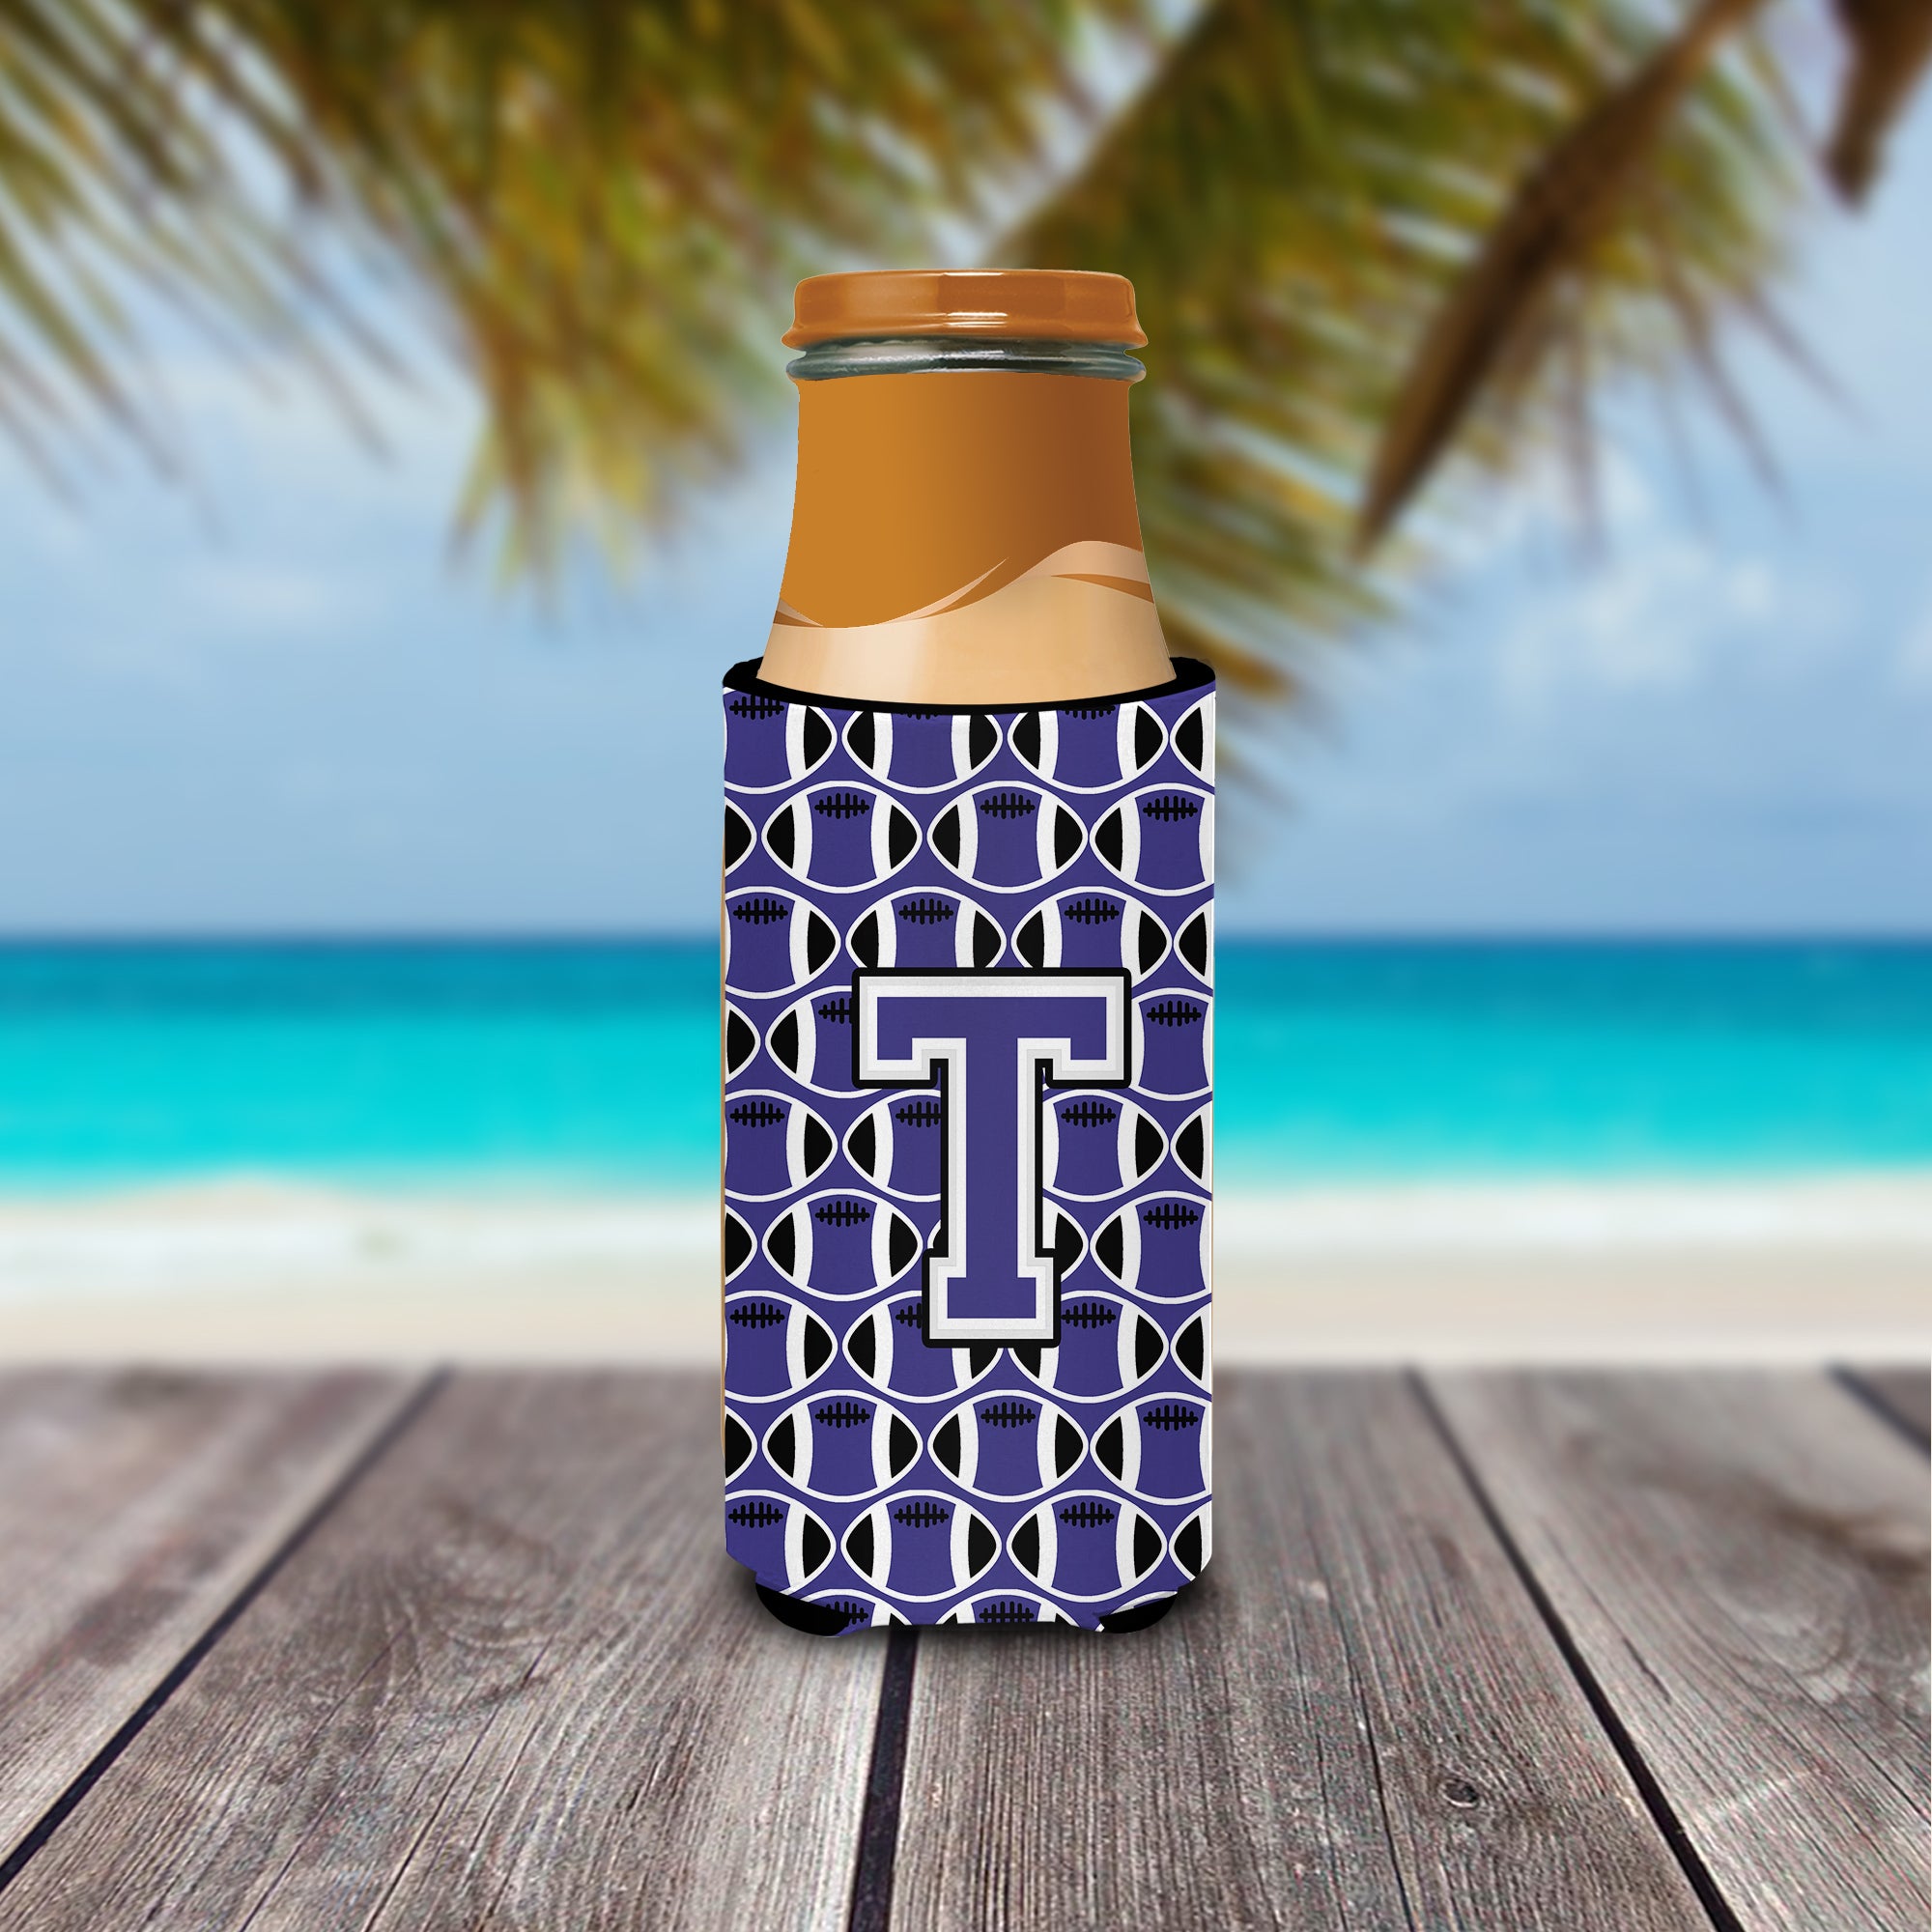 Letter T Football Purple and White Ultra Beverage Insulators for slim cans CJ1068-TMUK.